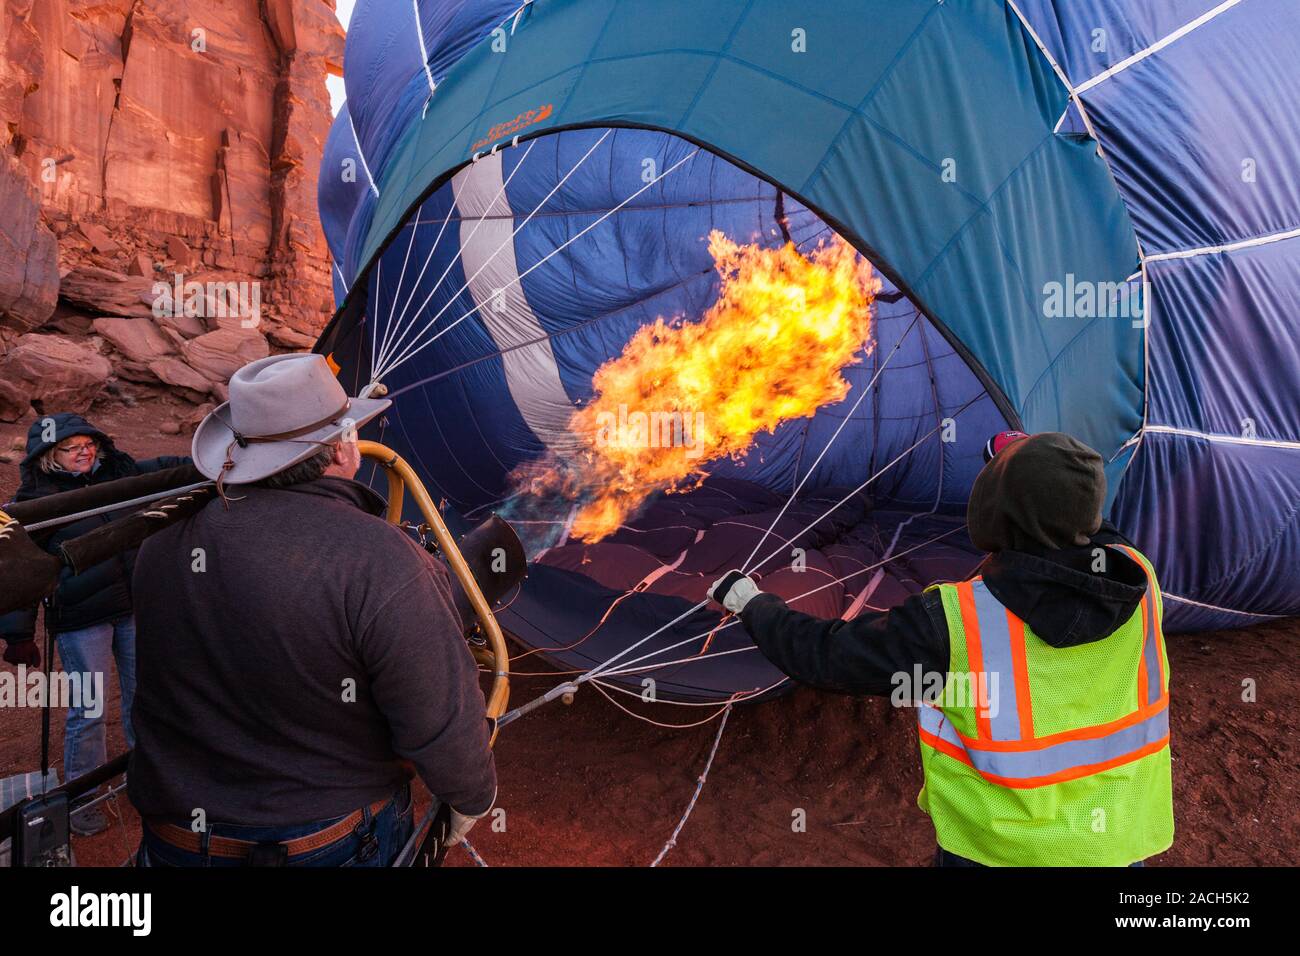 A hot air balloon fills with hot air from a buner in preparation for launch in the Monument Valley Balloon Festival in the Monument Valley Navajo Trib Stock Photo